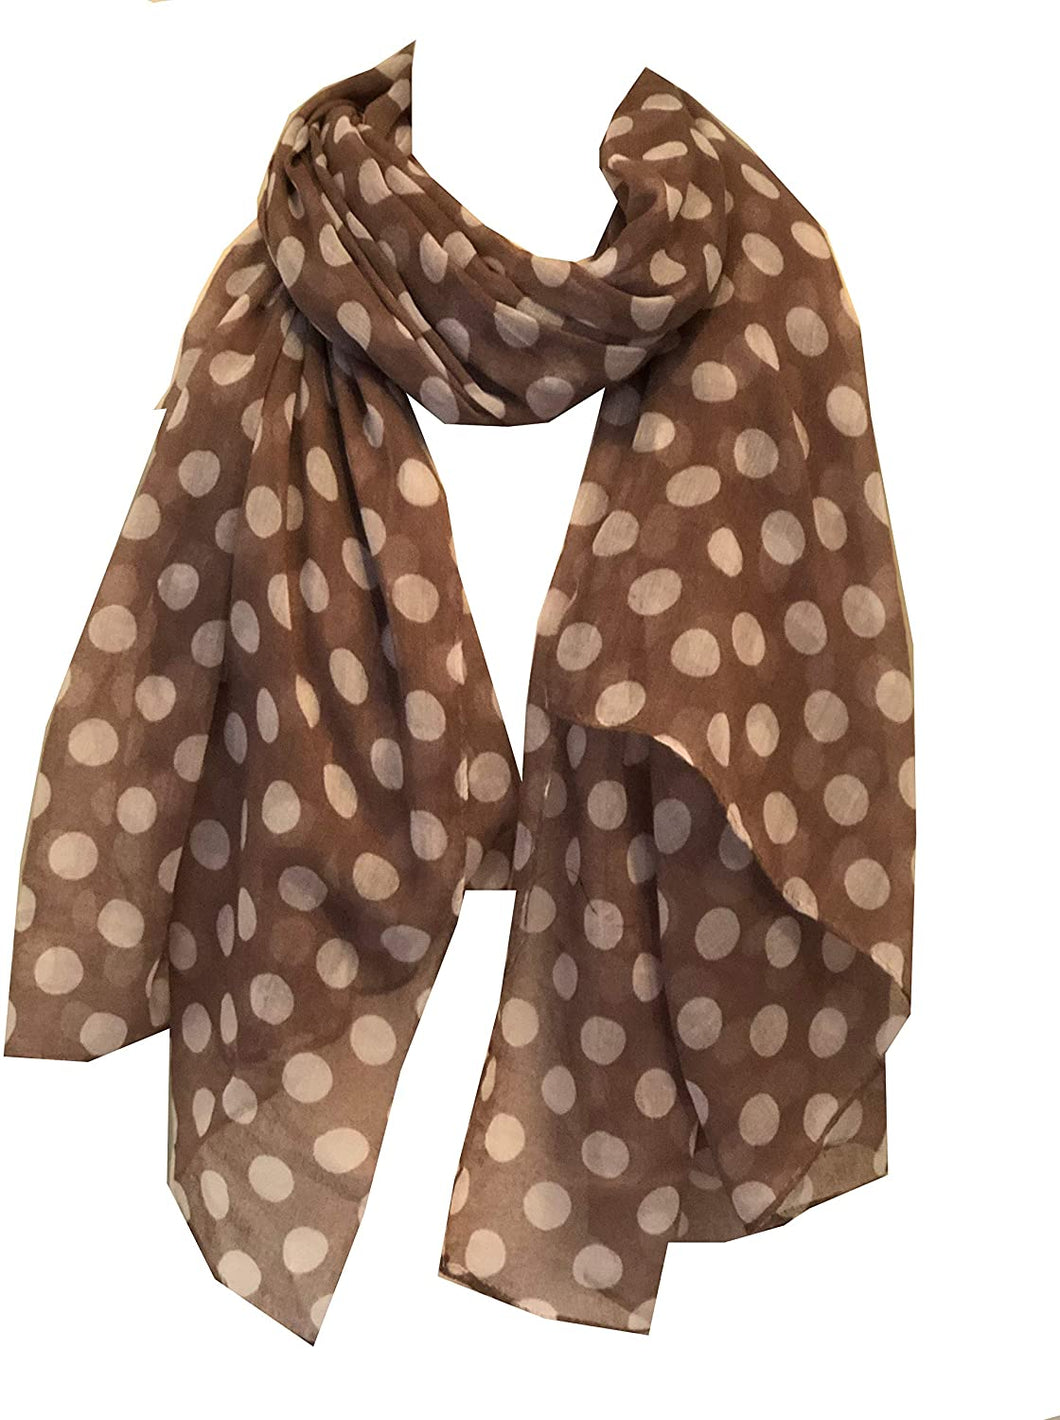 Pamper Yourself Now Light Brown with White Big spot Scarf/wrap